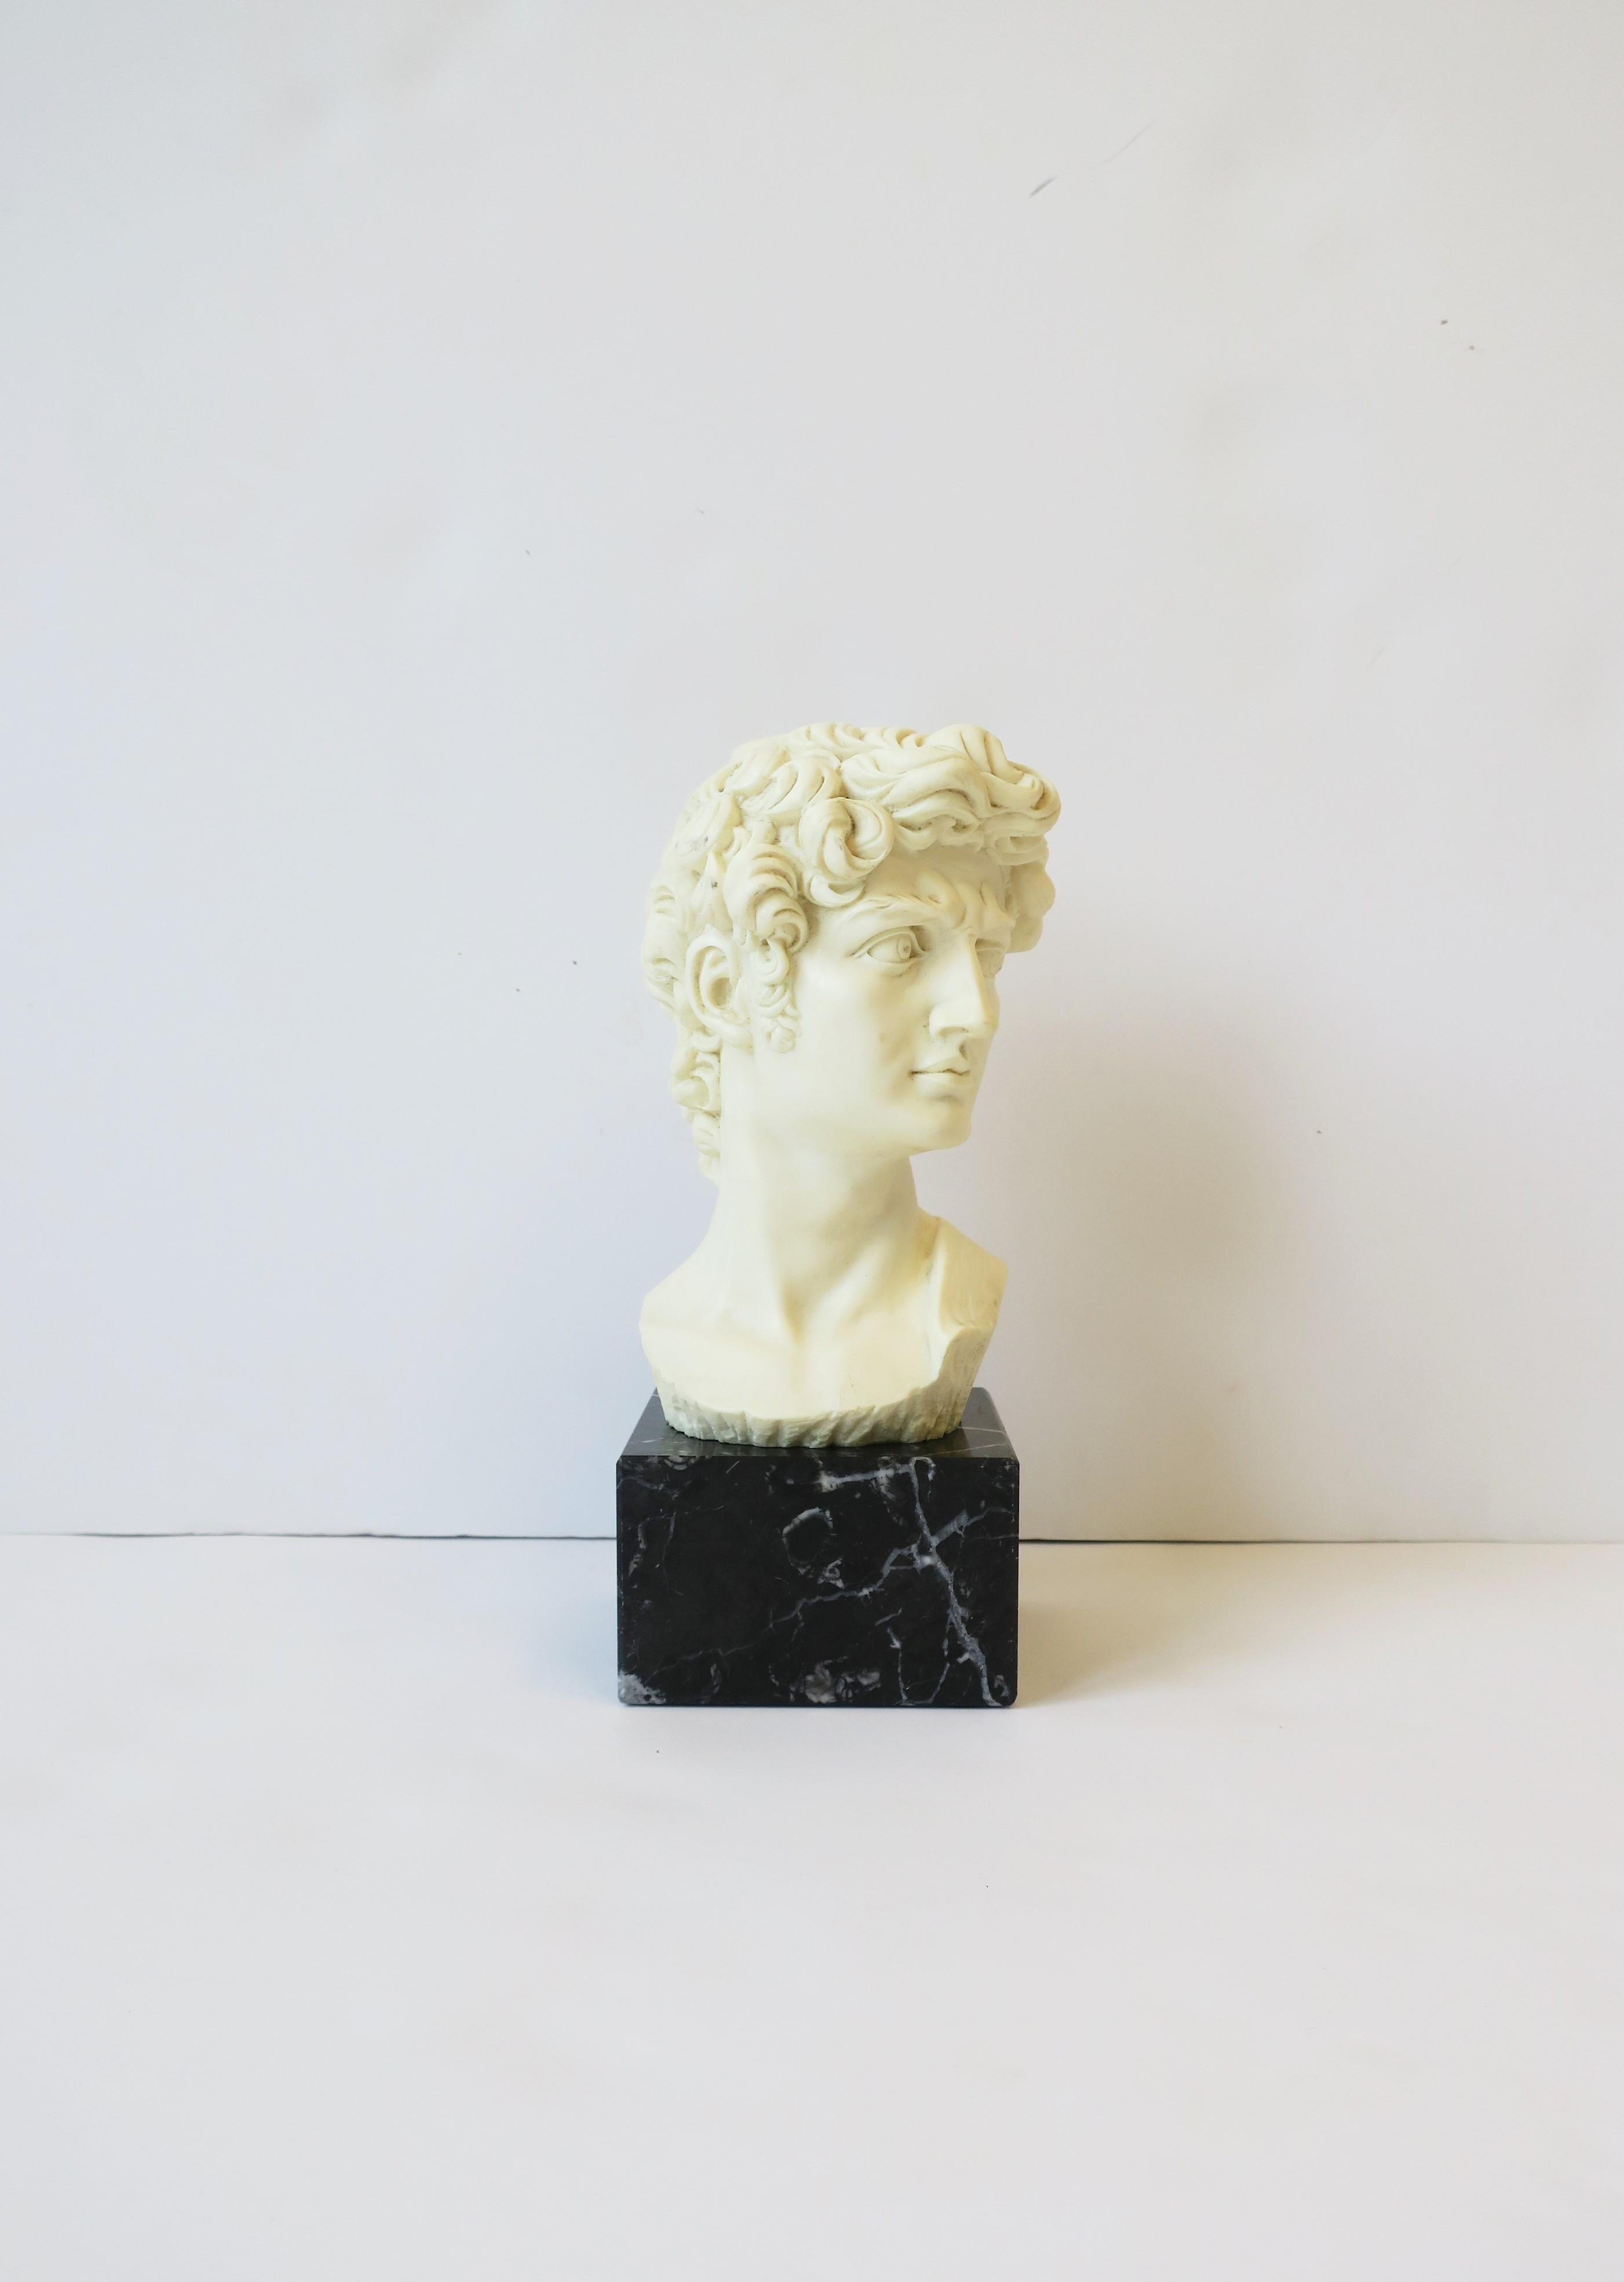 A substantial mid-20th century classic Italian Roman statue of the 'David' on a black marble base, circa 1960s, Italy. Piece is a resin head/bust on a black marble base with slight white veining. A nice decorative object for a book shelf, table,